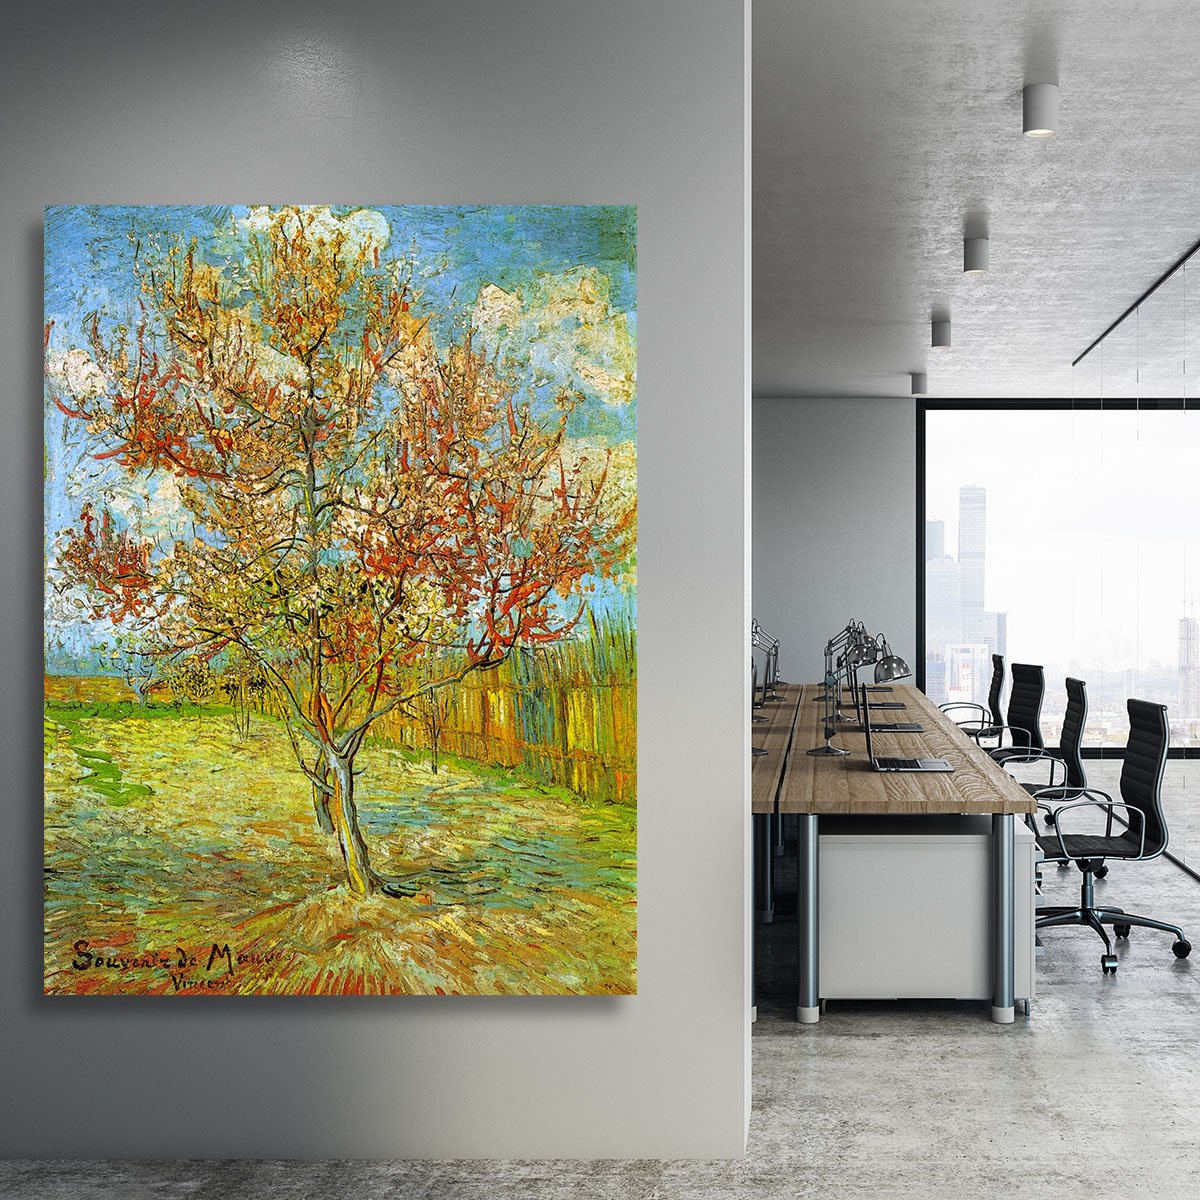 Pink Peach Tree in Blossom Reminiscence of Mauve by Van Gogh Canvas Print or Poster